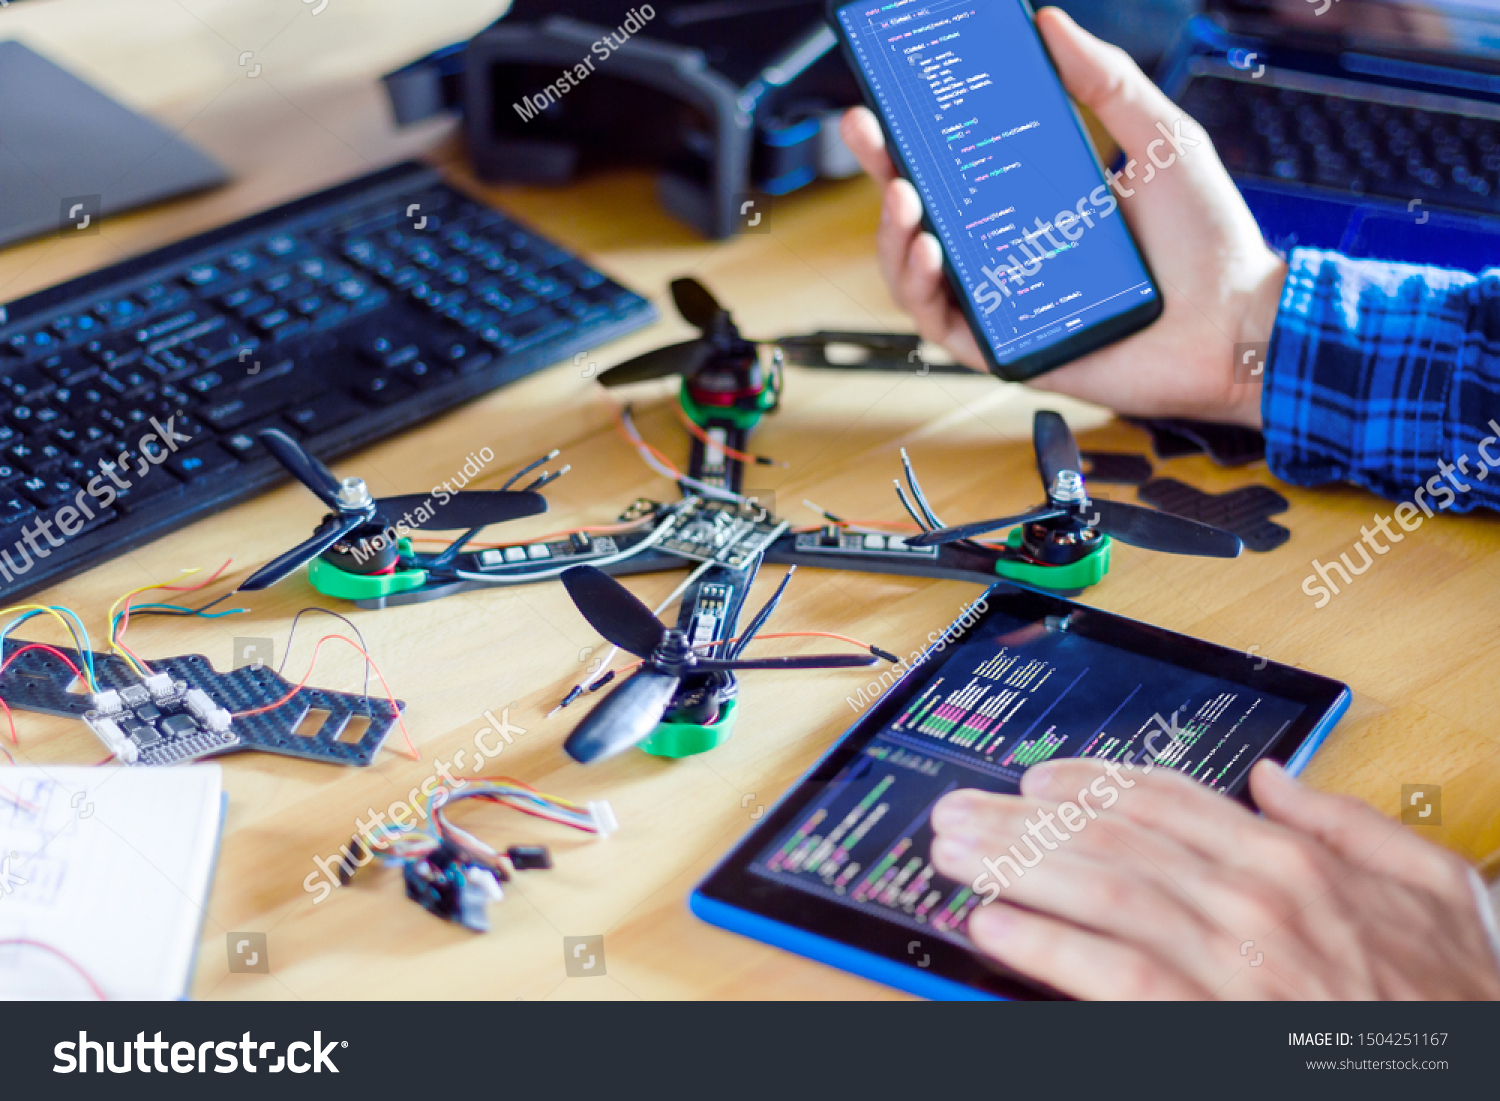 Closeup programmer hand holding smartphone and tablet with program code of software on screen for controlling FPV - first person view drone. Building quadcopter from kit with microcontrollers. #1504251167